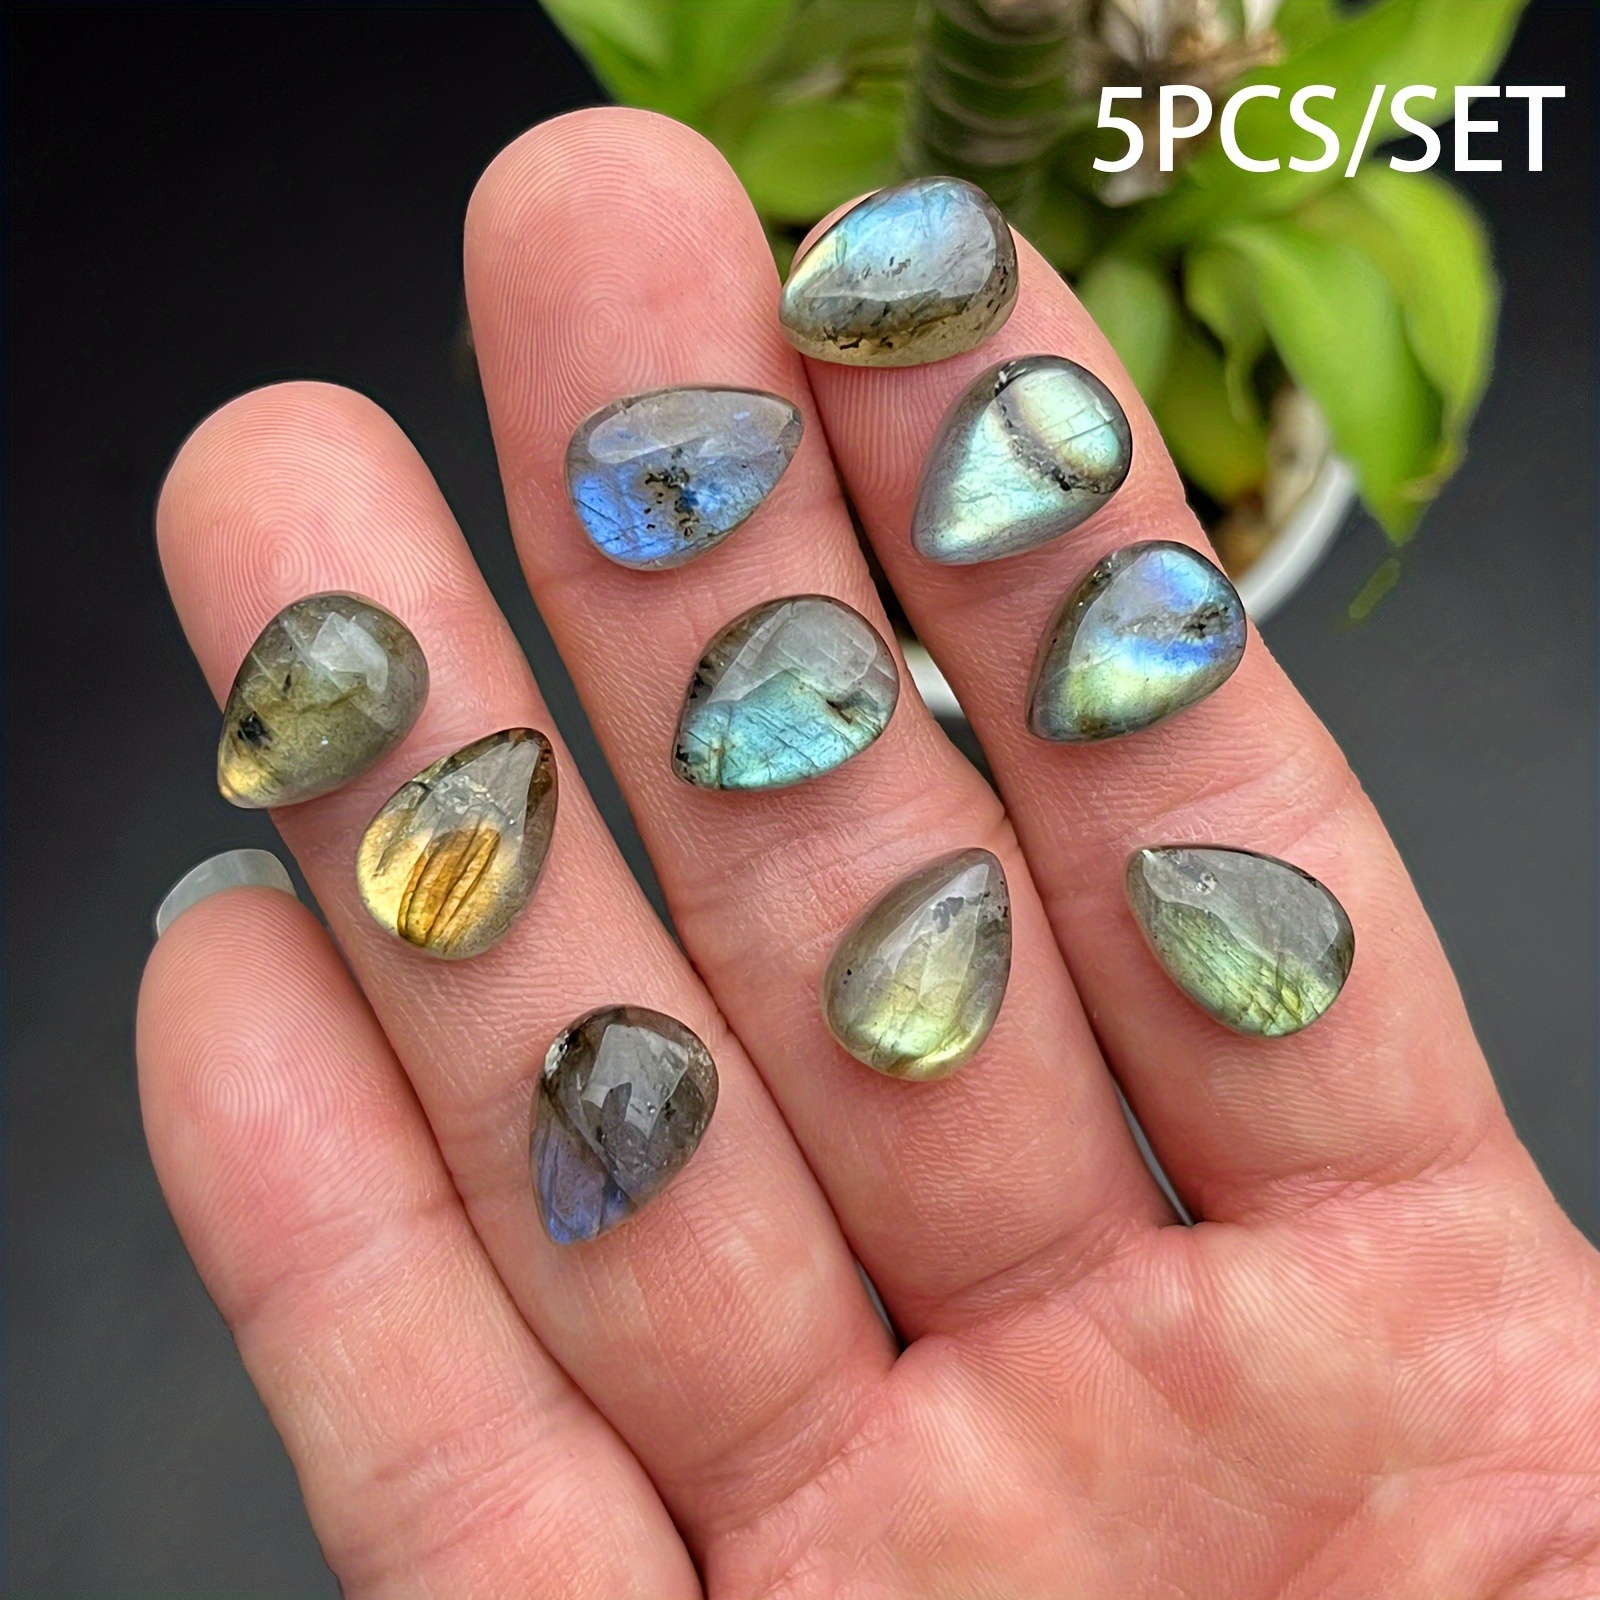 

5pcs Natural Cabochons Teardrop Stone, Flatback Beads, Waterdrop Stone Rock For Making Jewelry Diy Ornament Accessories Pendants Rings